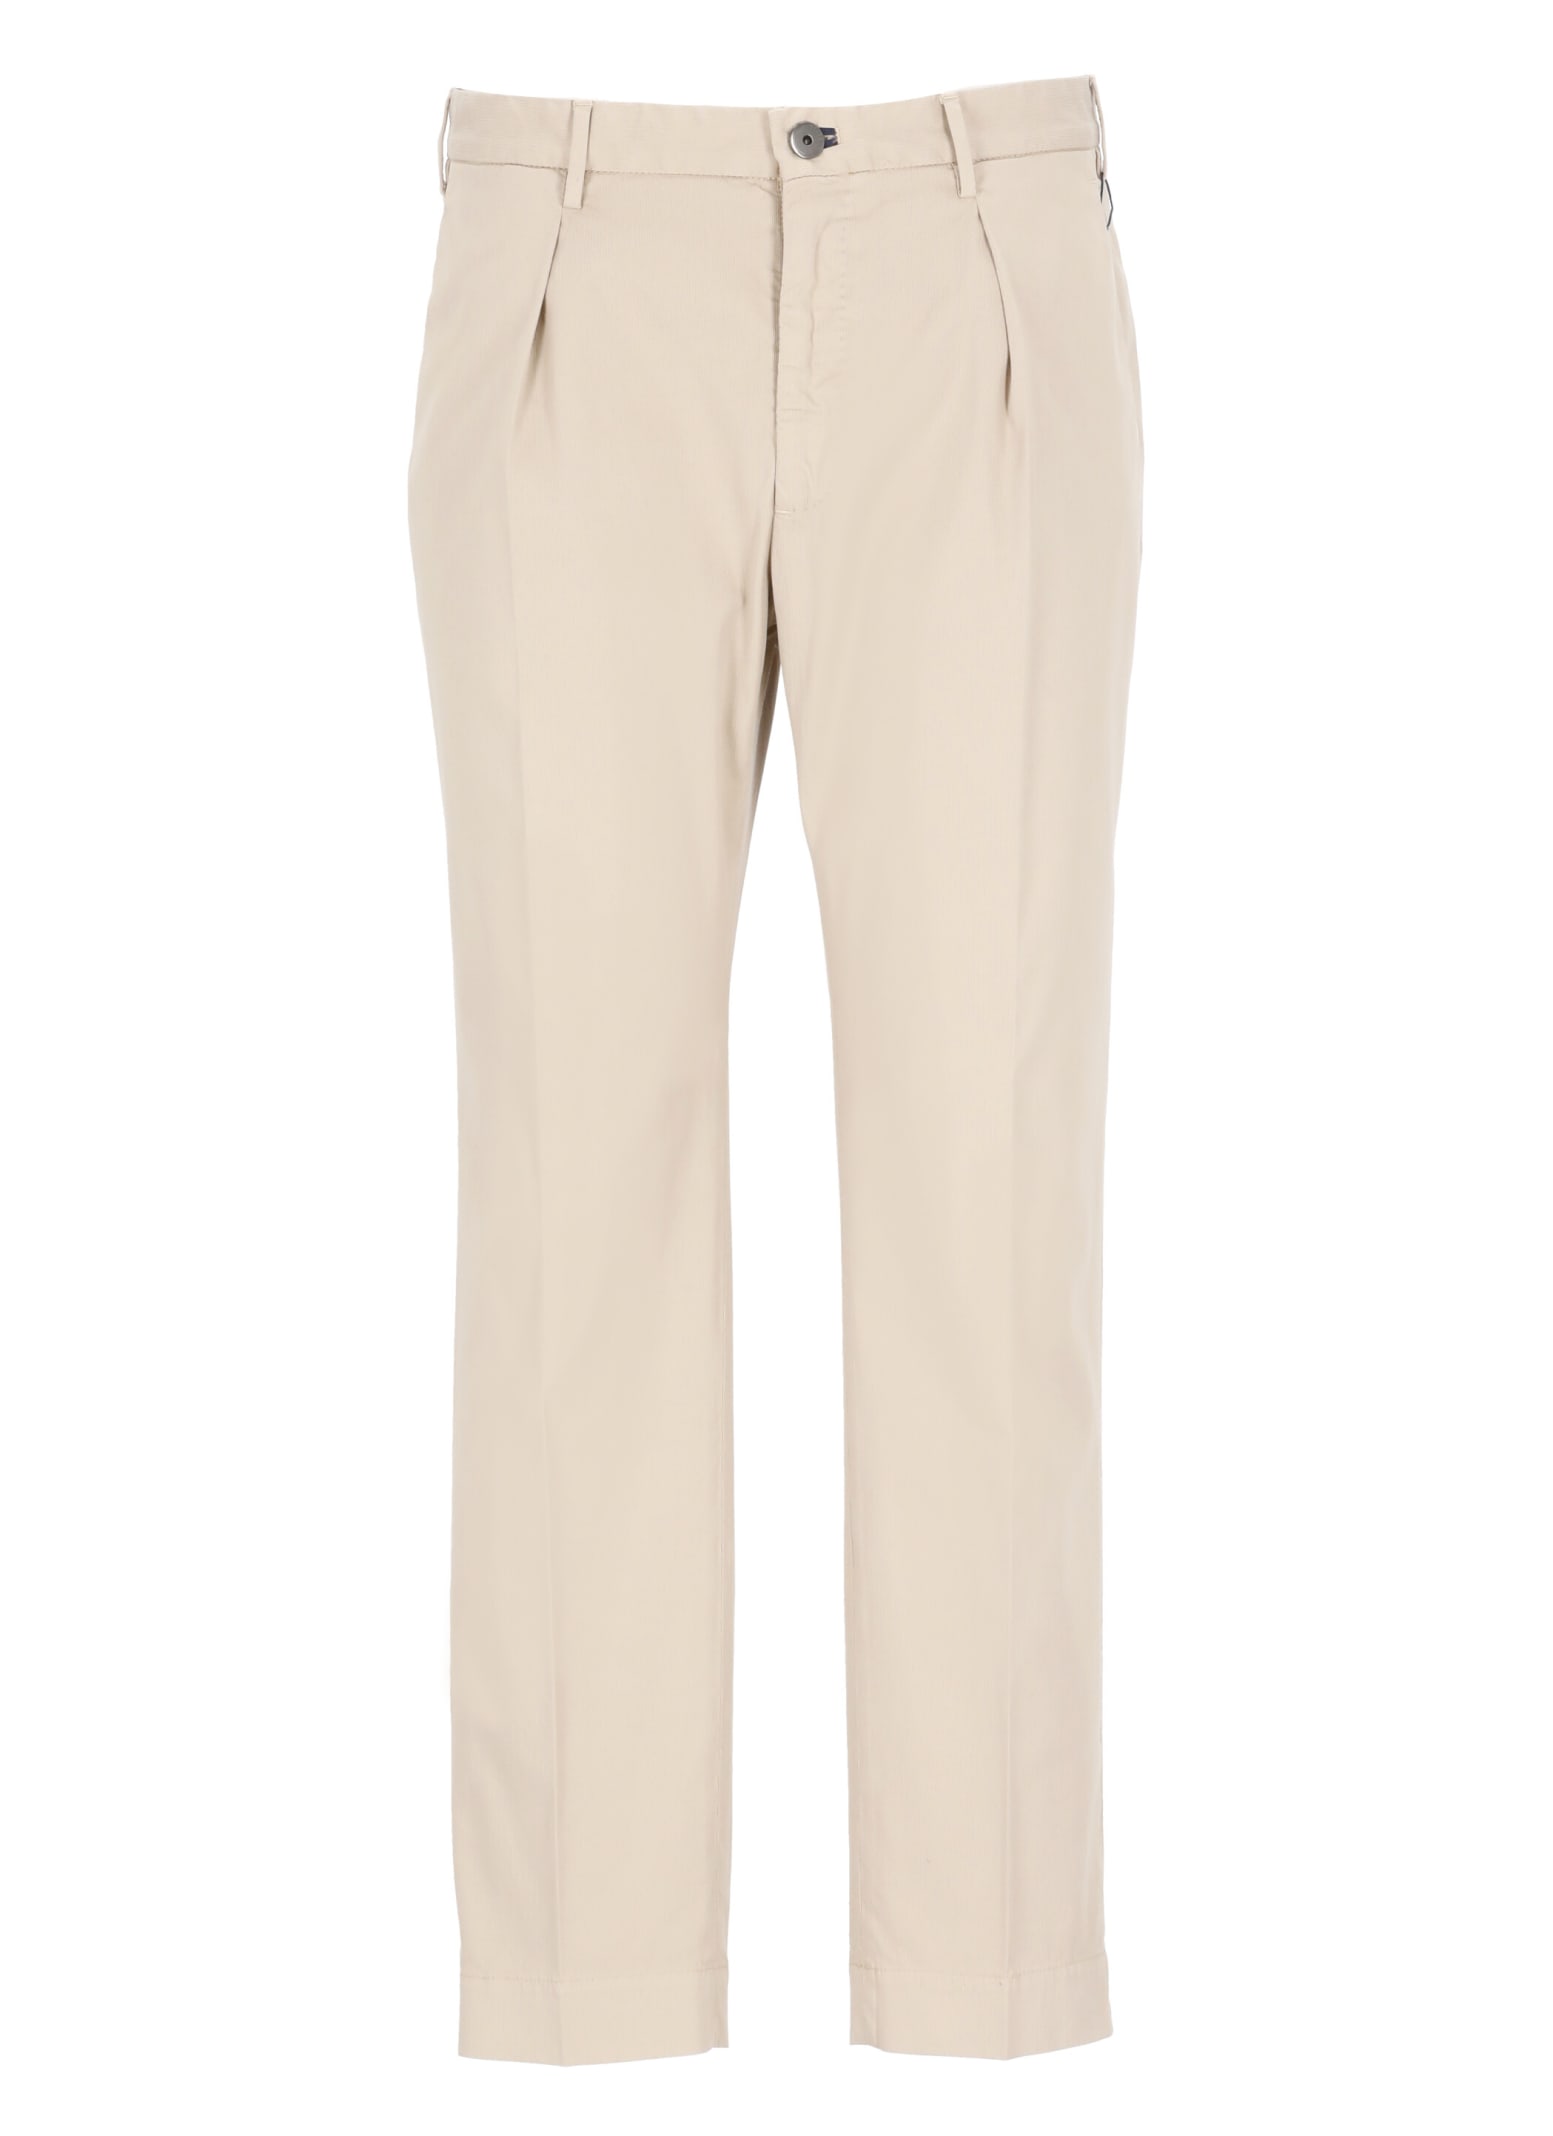 Incotex Carrot Fit Ribbed Trousers